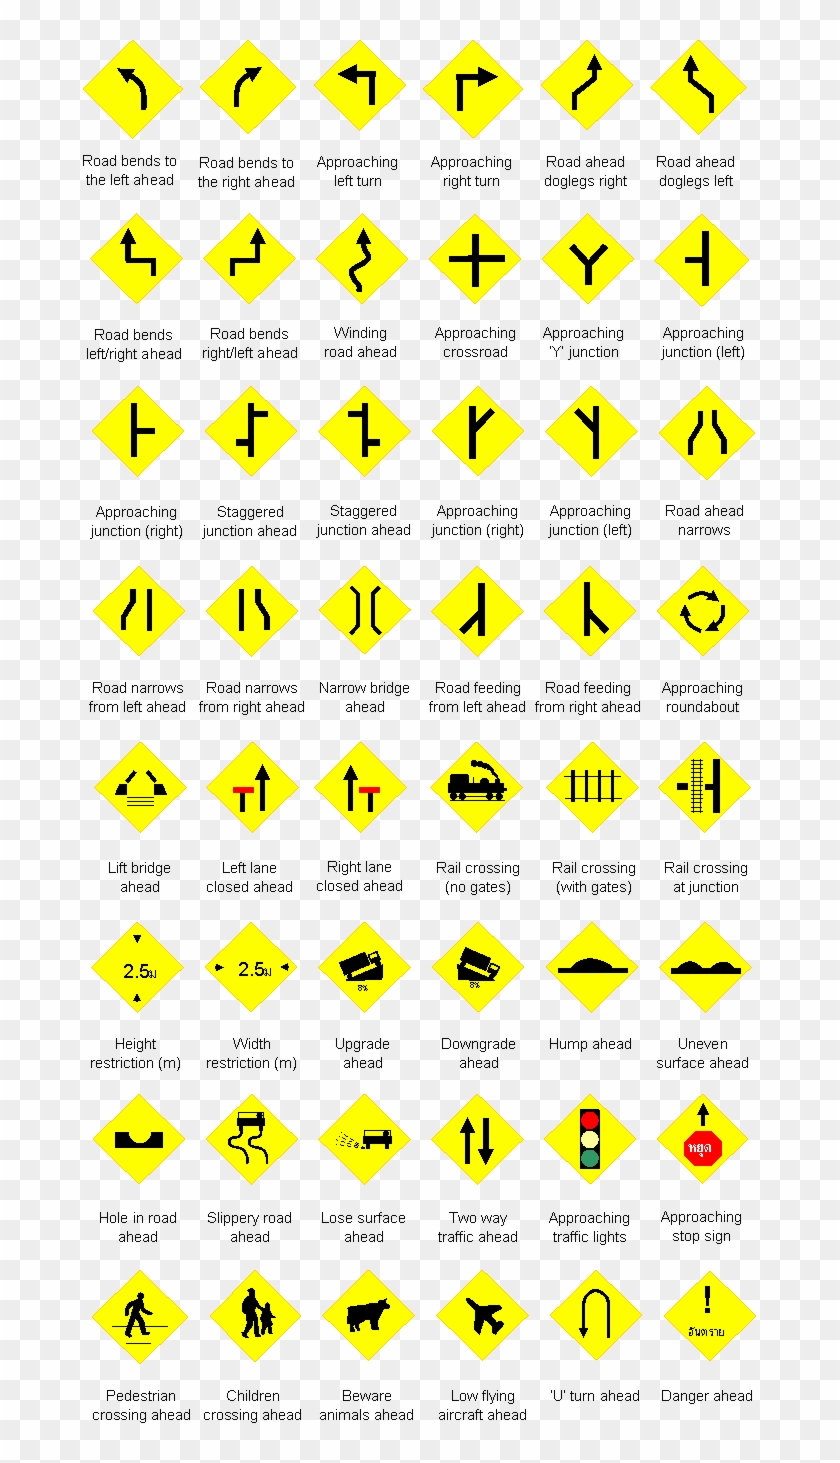 Road Markings And Their Meanings